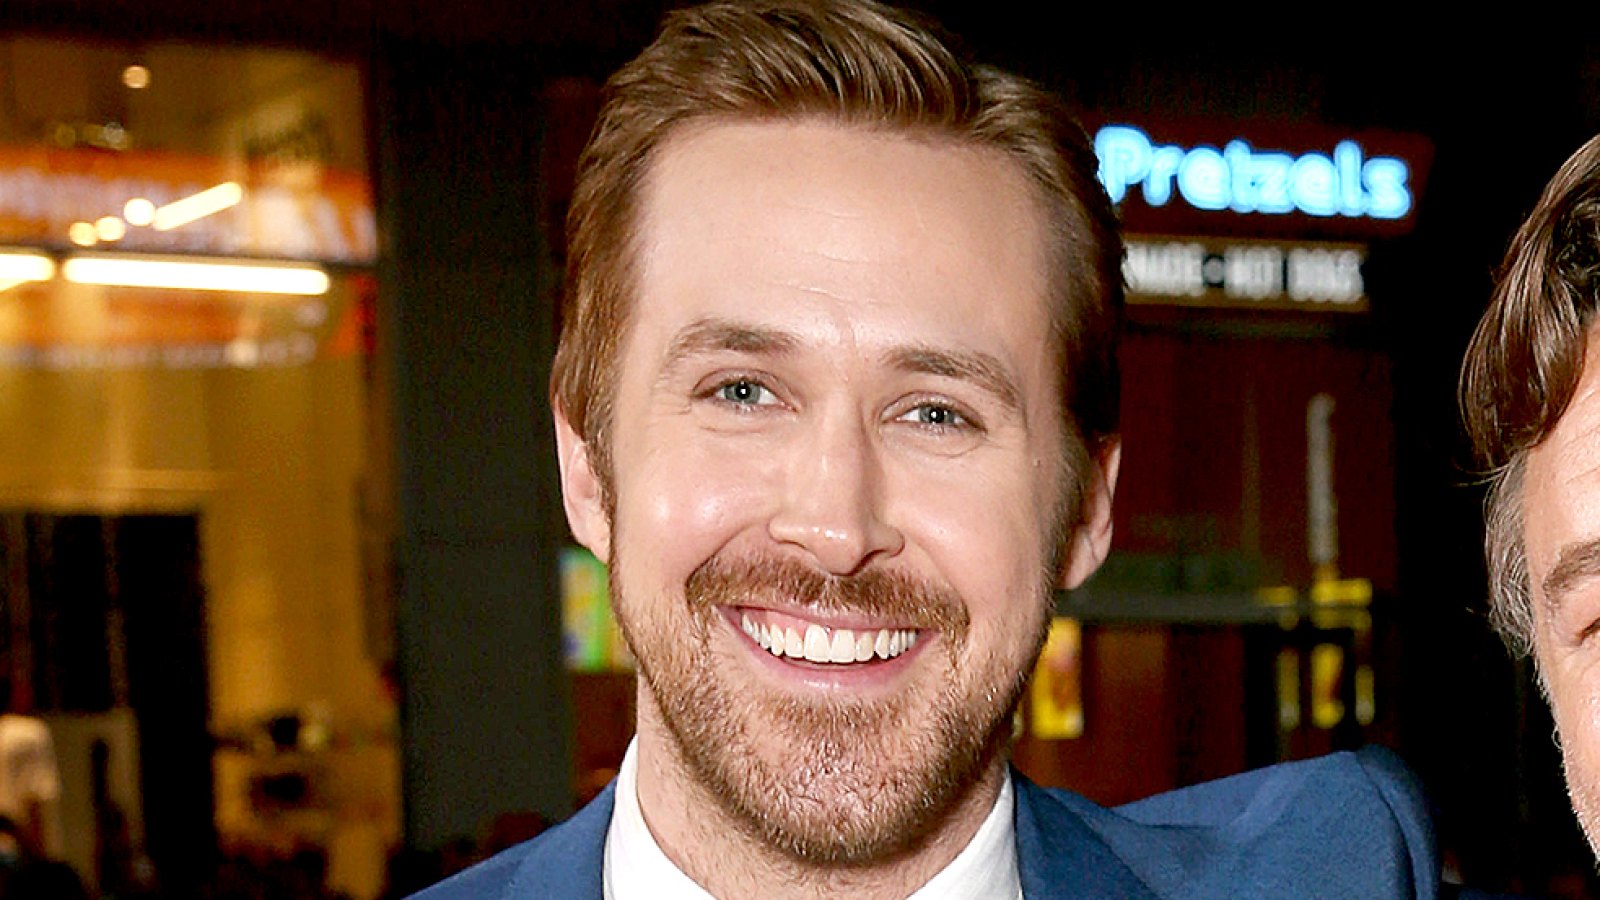 Ryan Gosling attends the premiere of Warner Bros. Pictures' 'The Nice Guys' at TCL Chinese Theatre on May 10, 2016 in Hollywood, California.